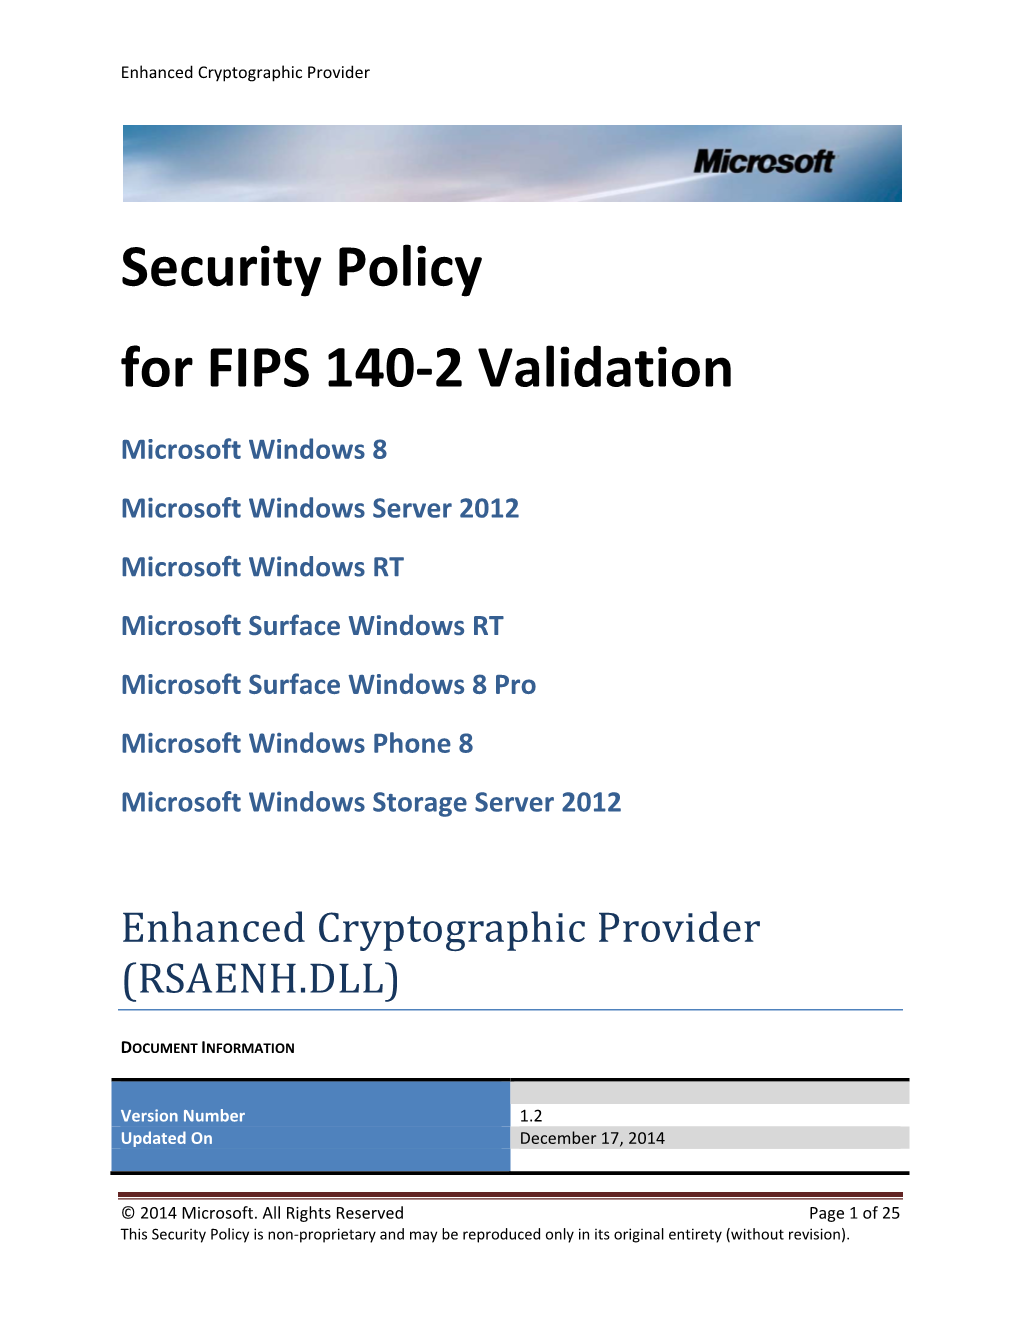 Security Policy for FIPS 140-2 Validation